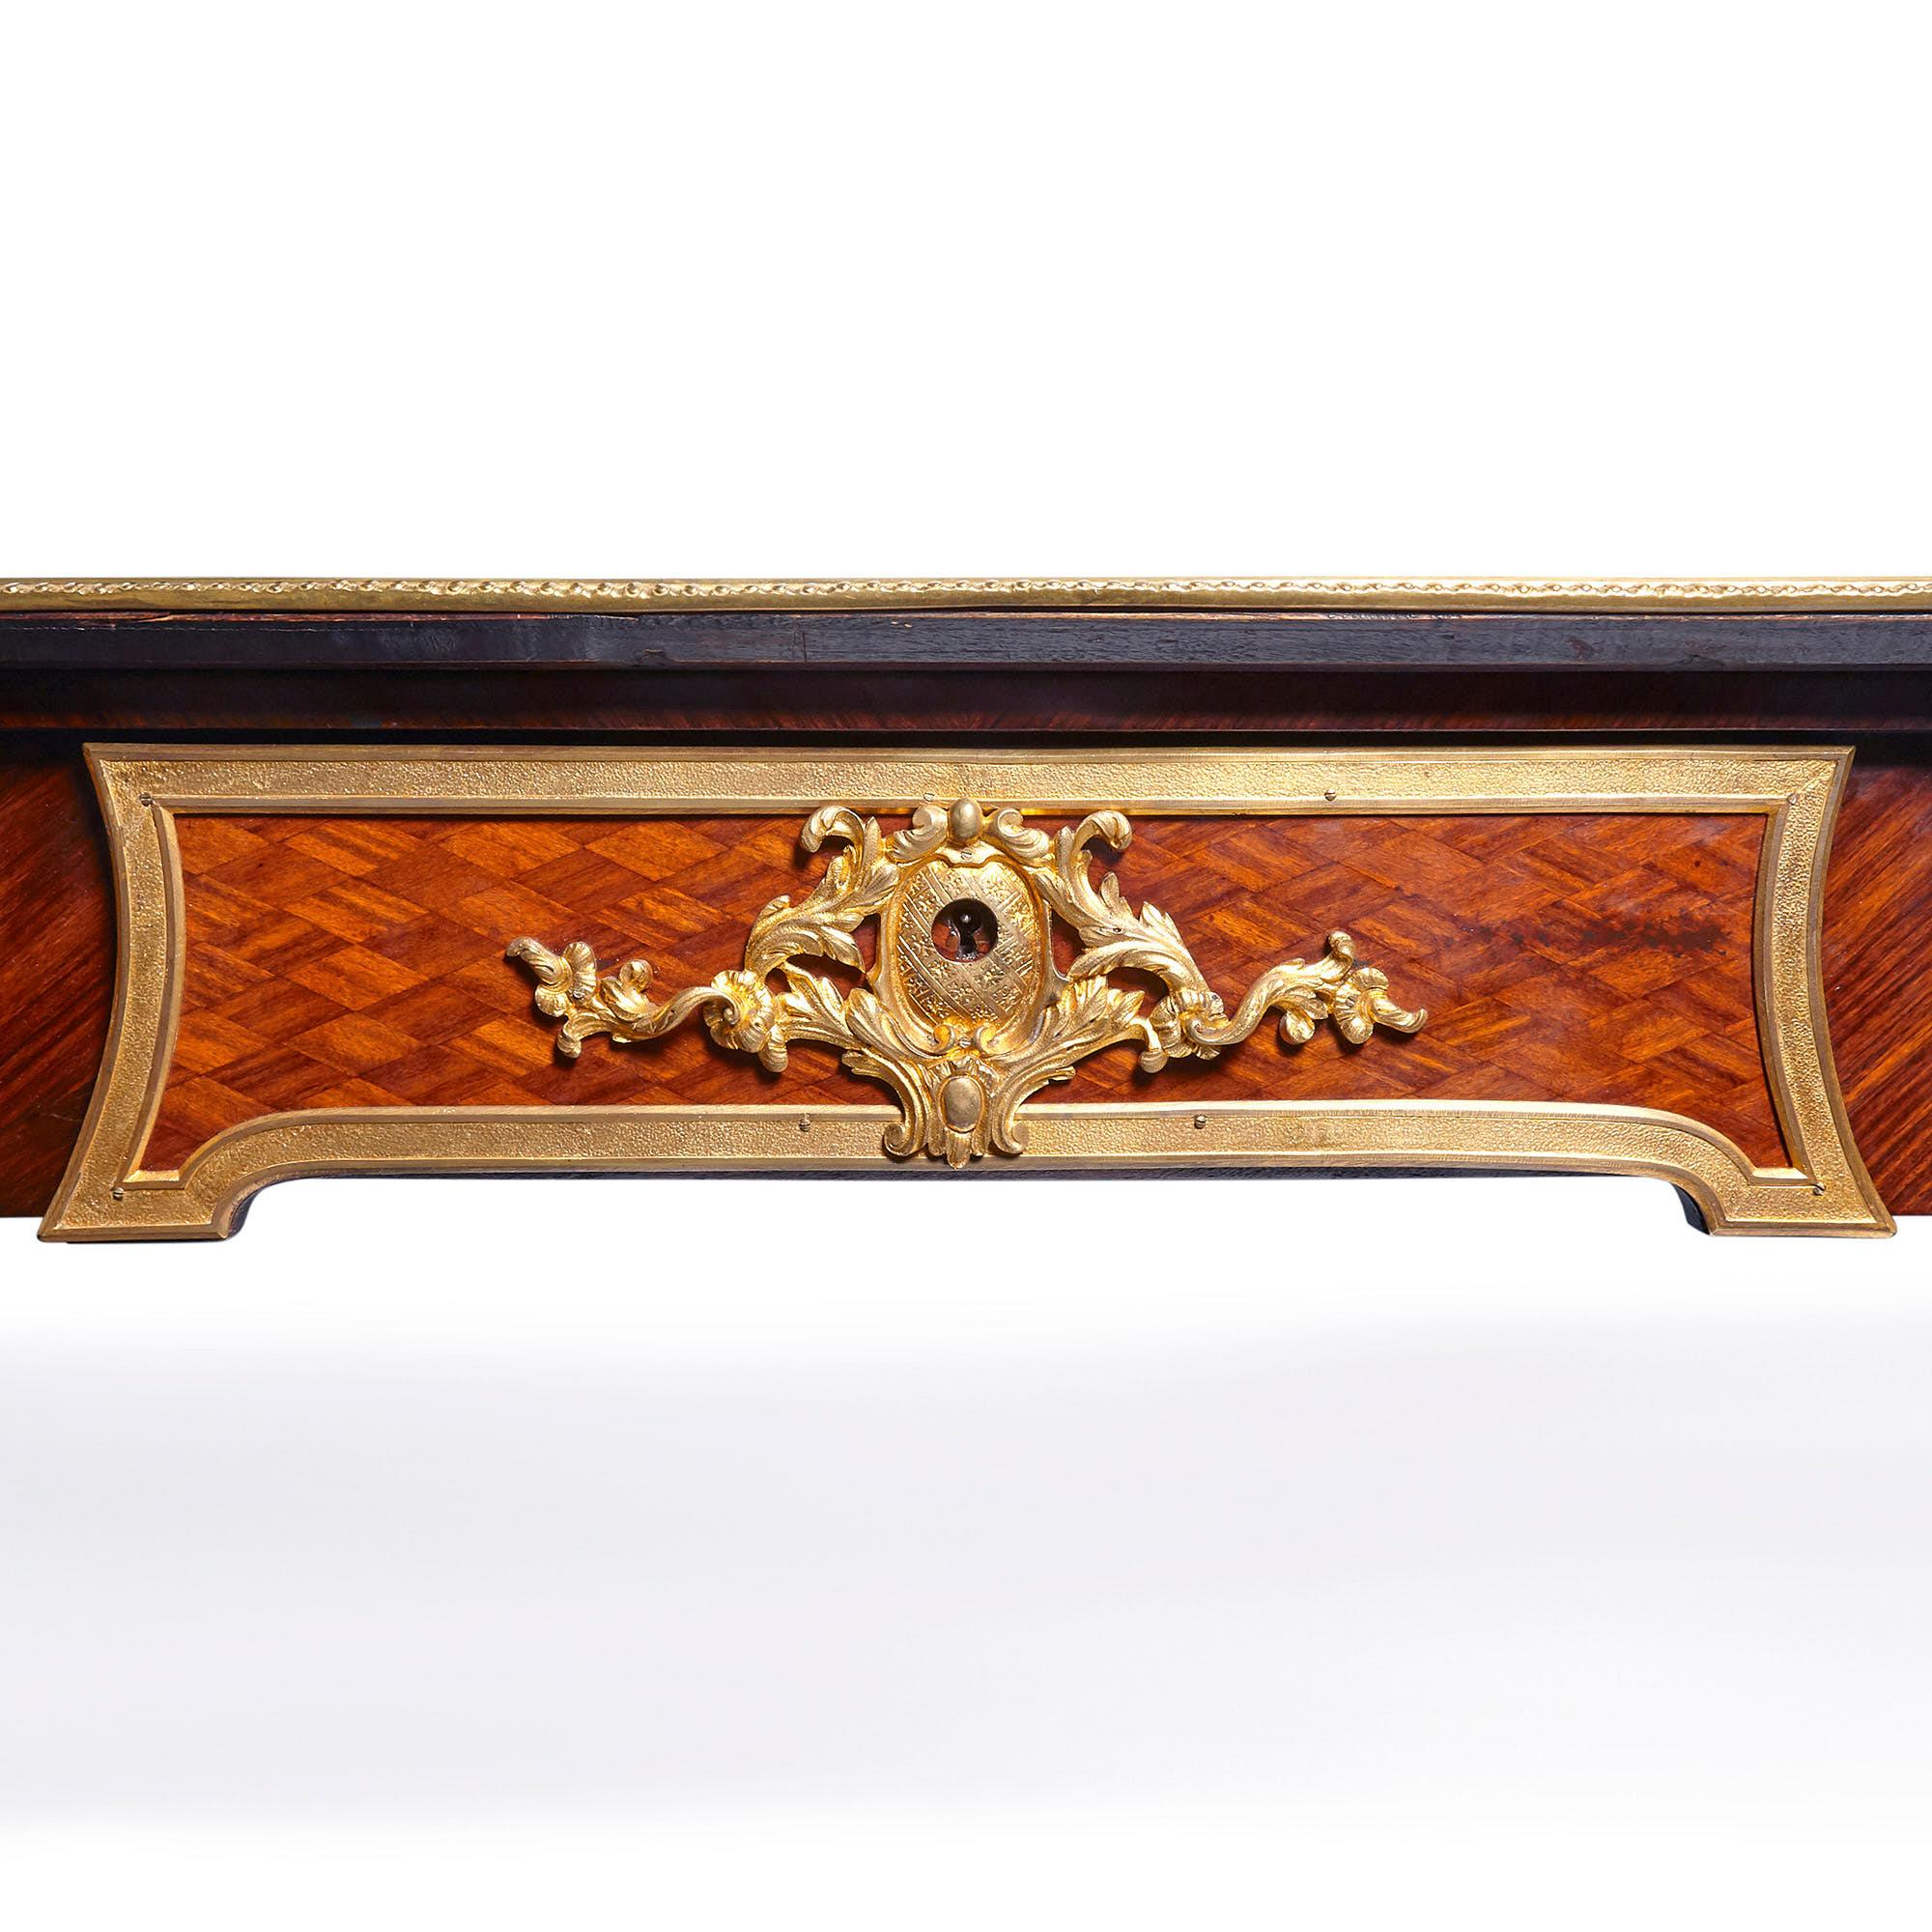 Louis XV style gilt bronze mounted writing desk by Poteau
French, late 19th century
Size: Height 78cm, width 180cm, depth 87cm

This beautiful Louis XV style writing desk is raised on four cabriole leg, each finished with a gilt bronze paw foot